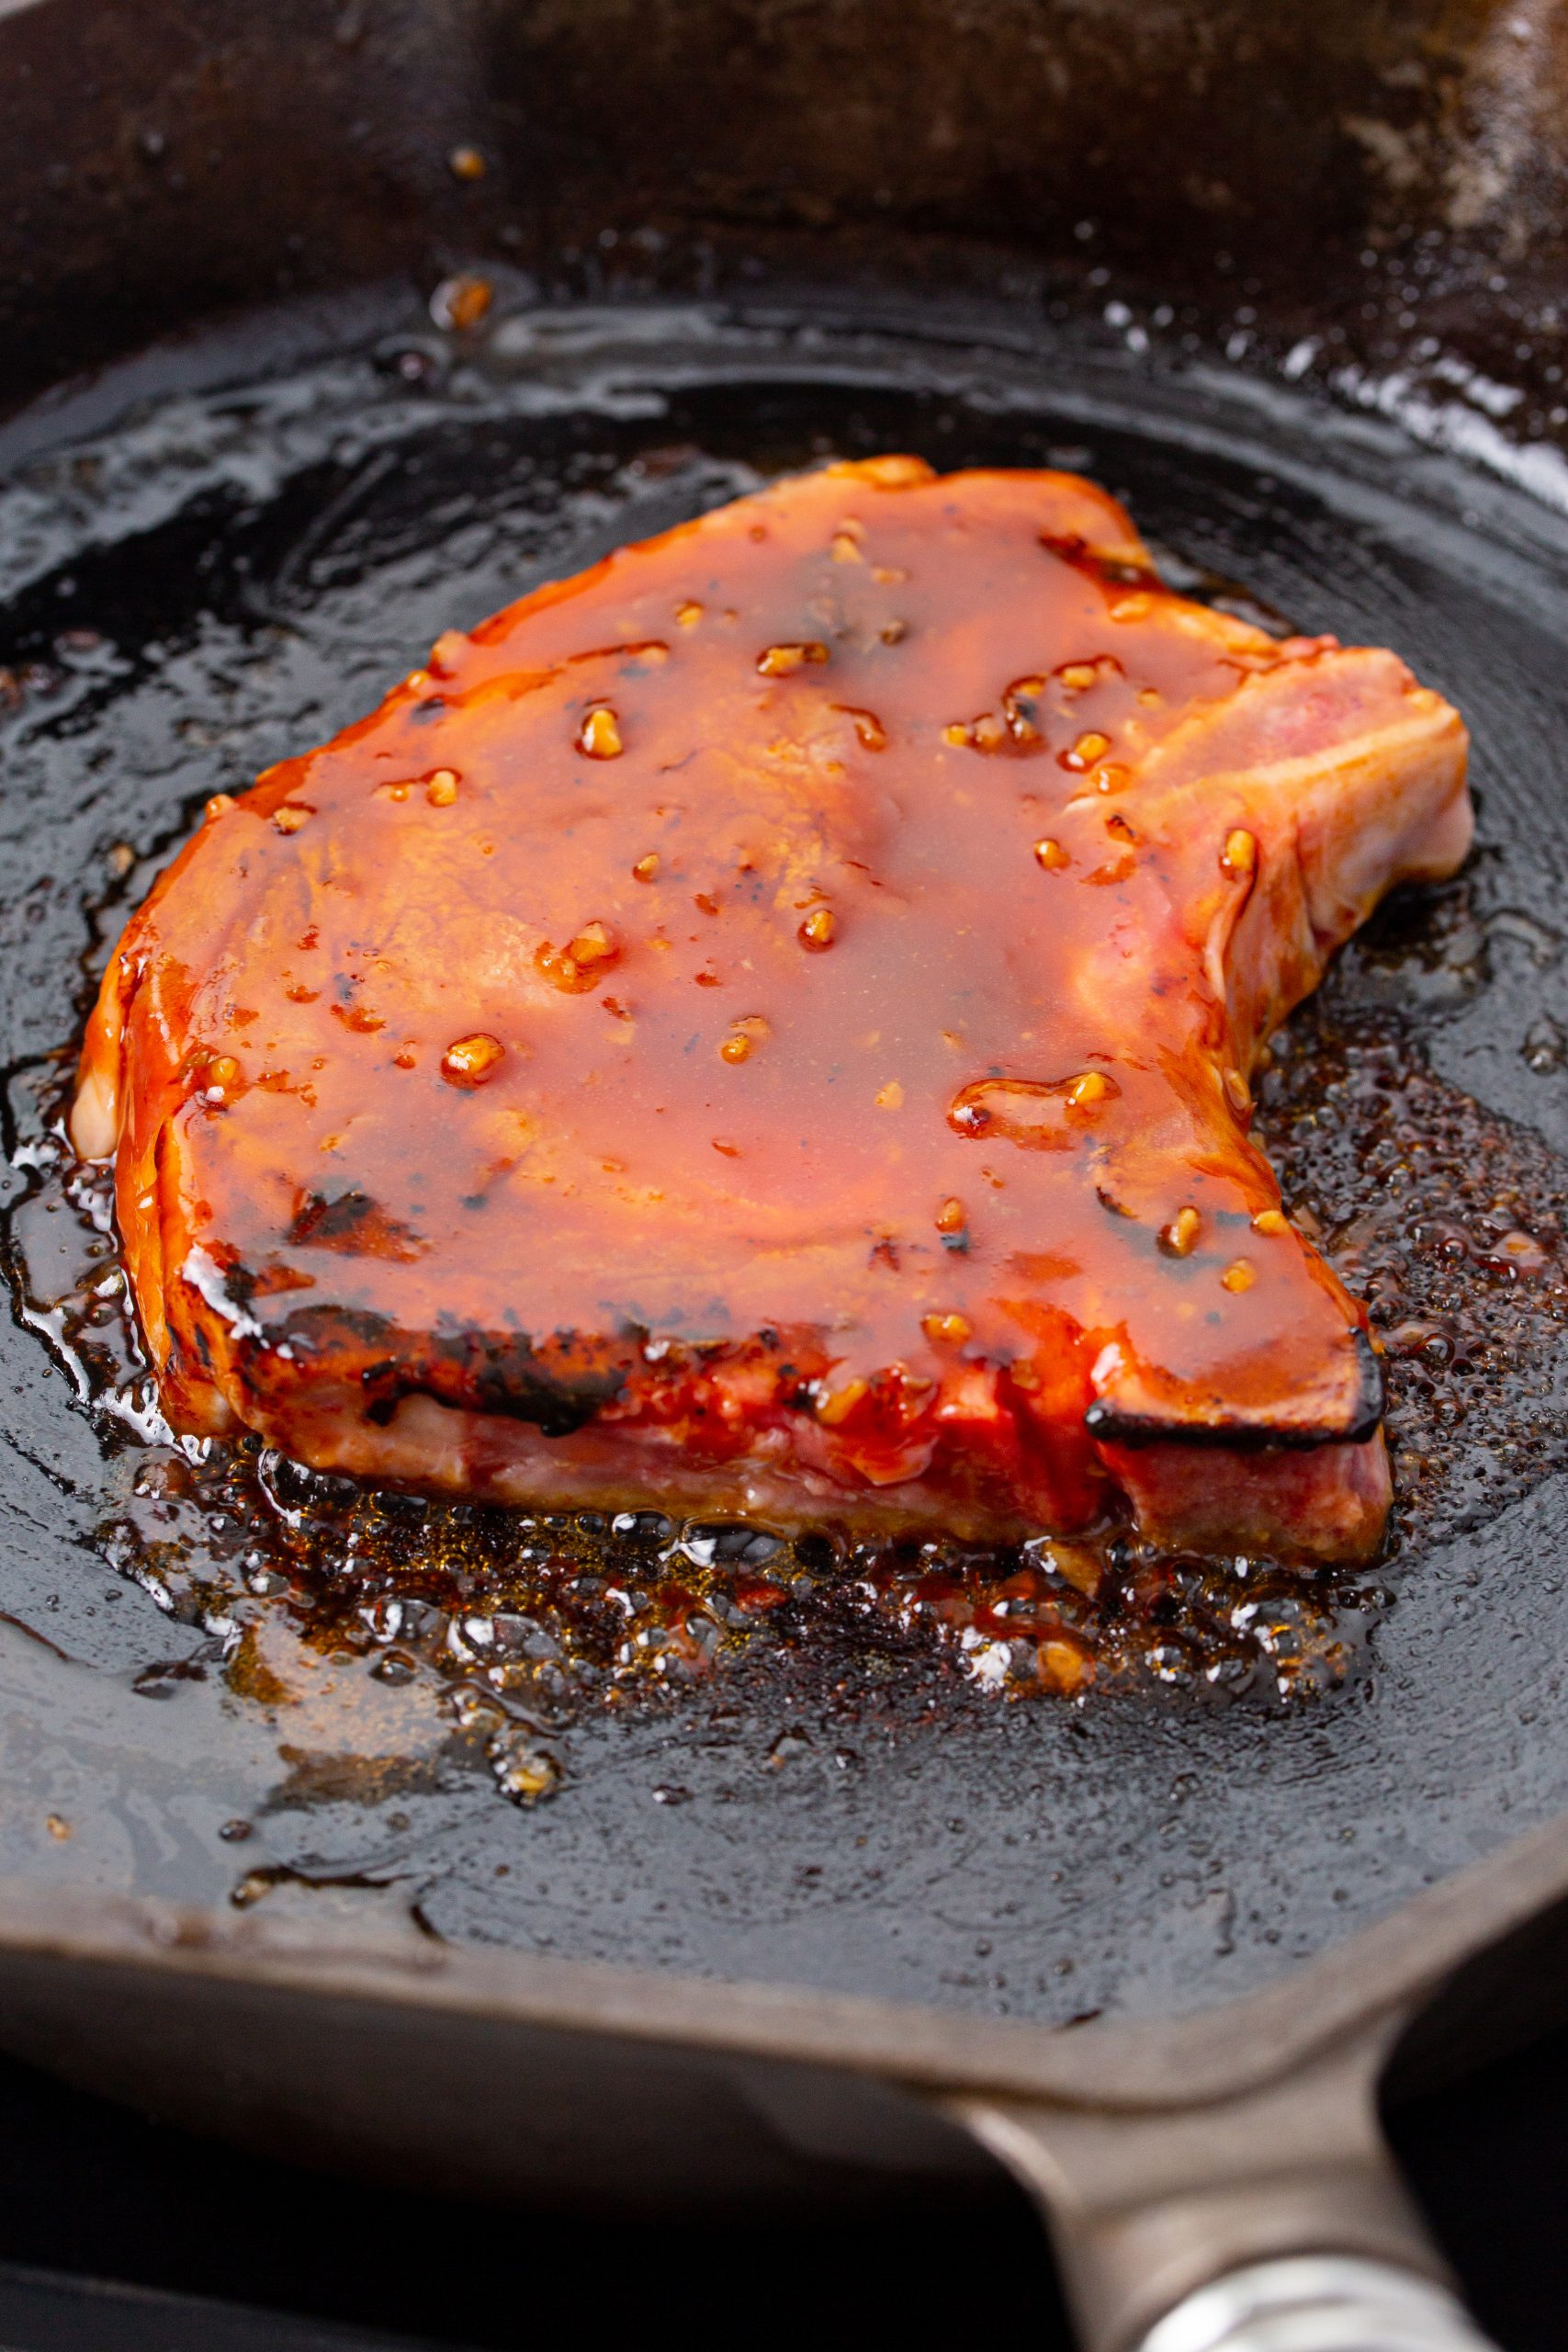 Meat with a reddish glaze is cooking in a cast iron skillet. The glaze is bubbling and caramelizing around the edges of the meat.